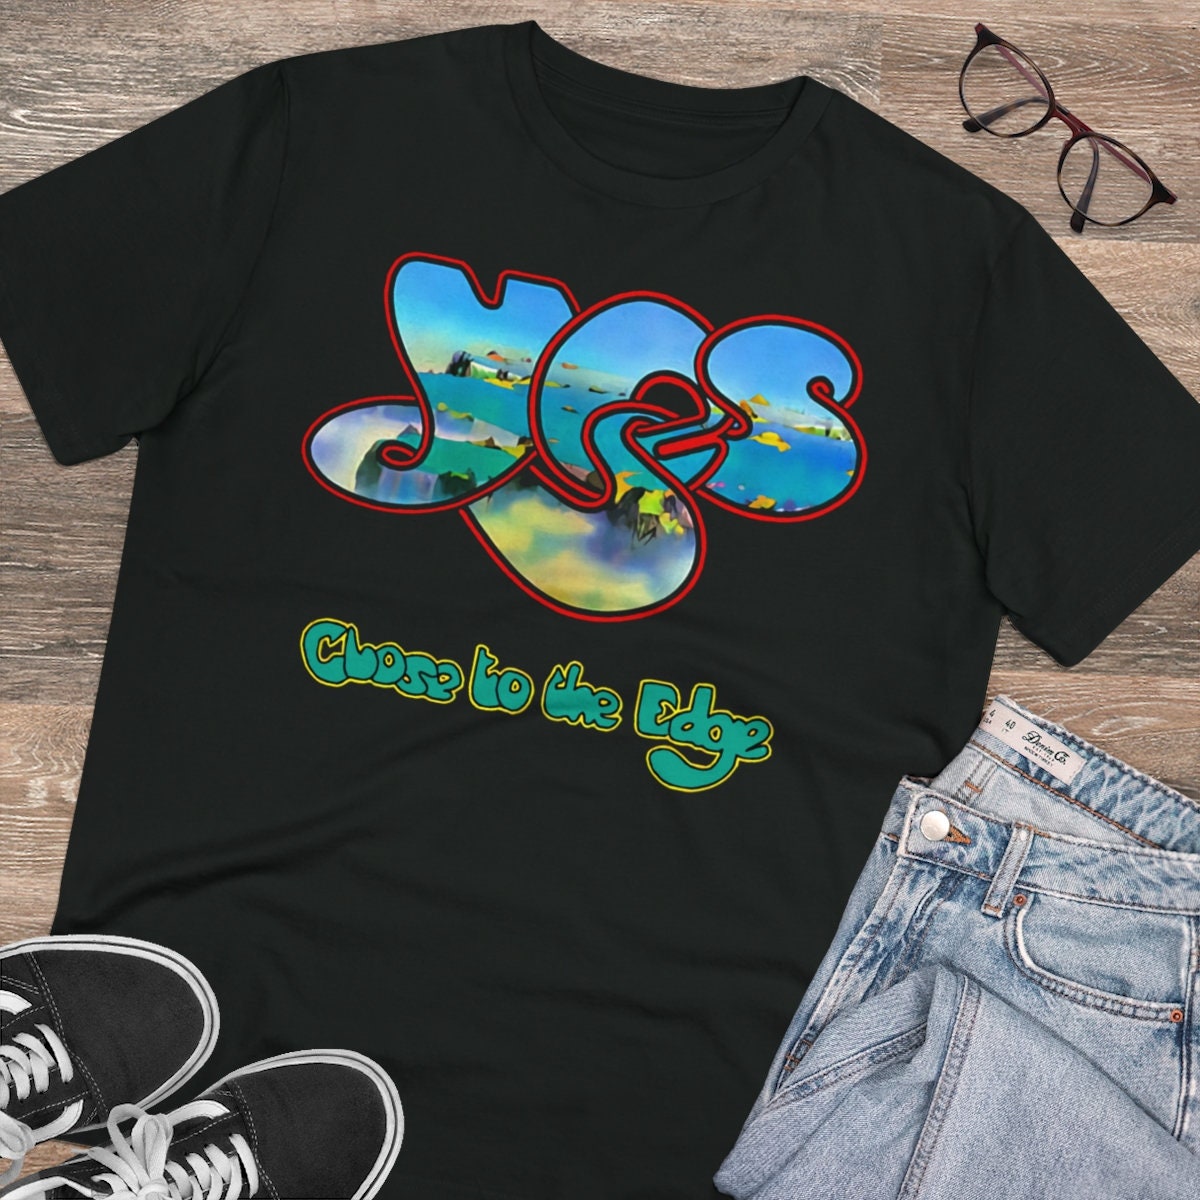 Discover YES Close To The Edge Band Logo Men's Black Tee Clothing Tshirt